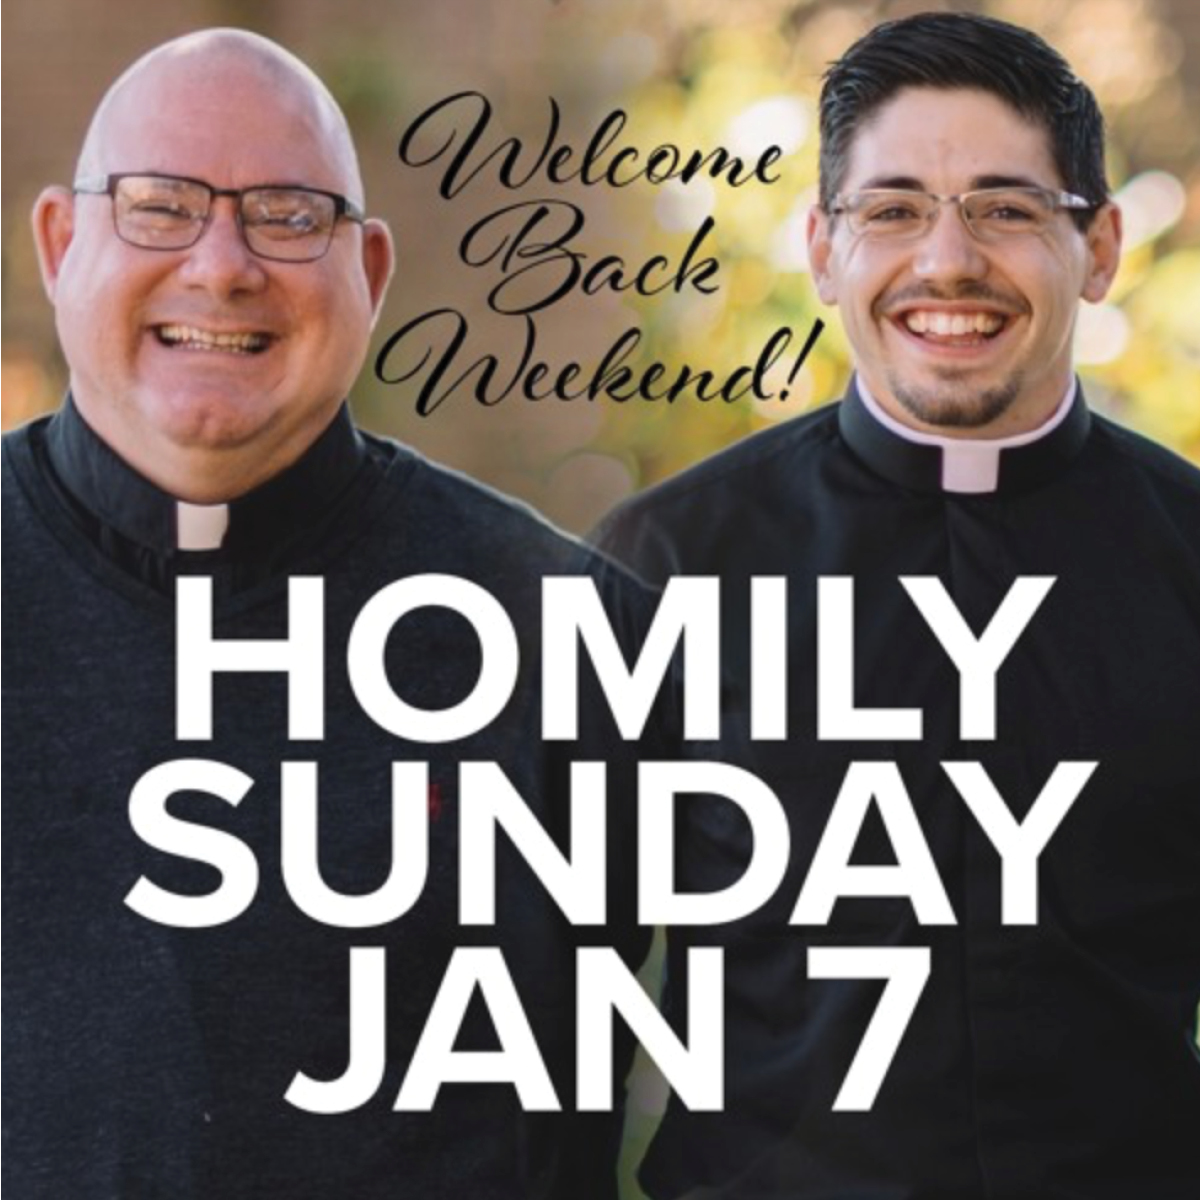 Fr. Mark & Fr. Brice l 1st Weekend at CTR l Sunday, January 7, 2018